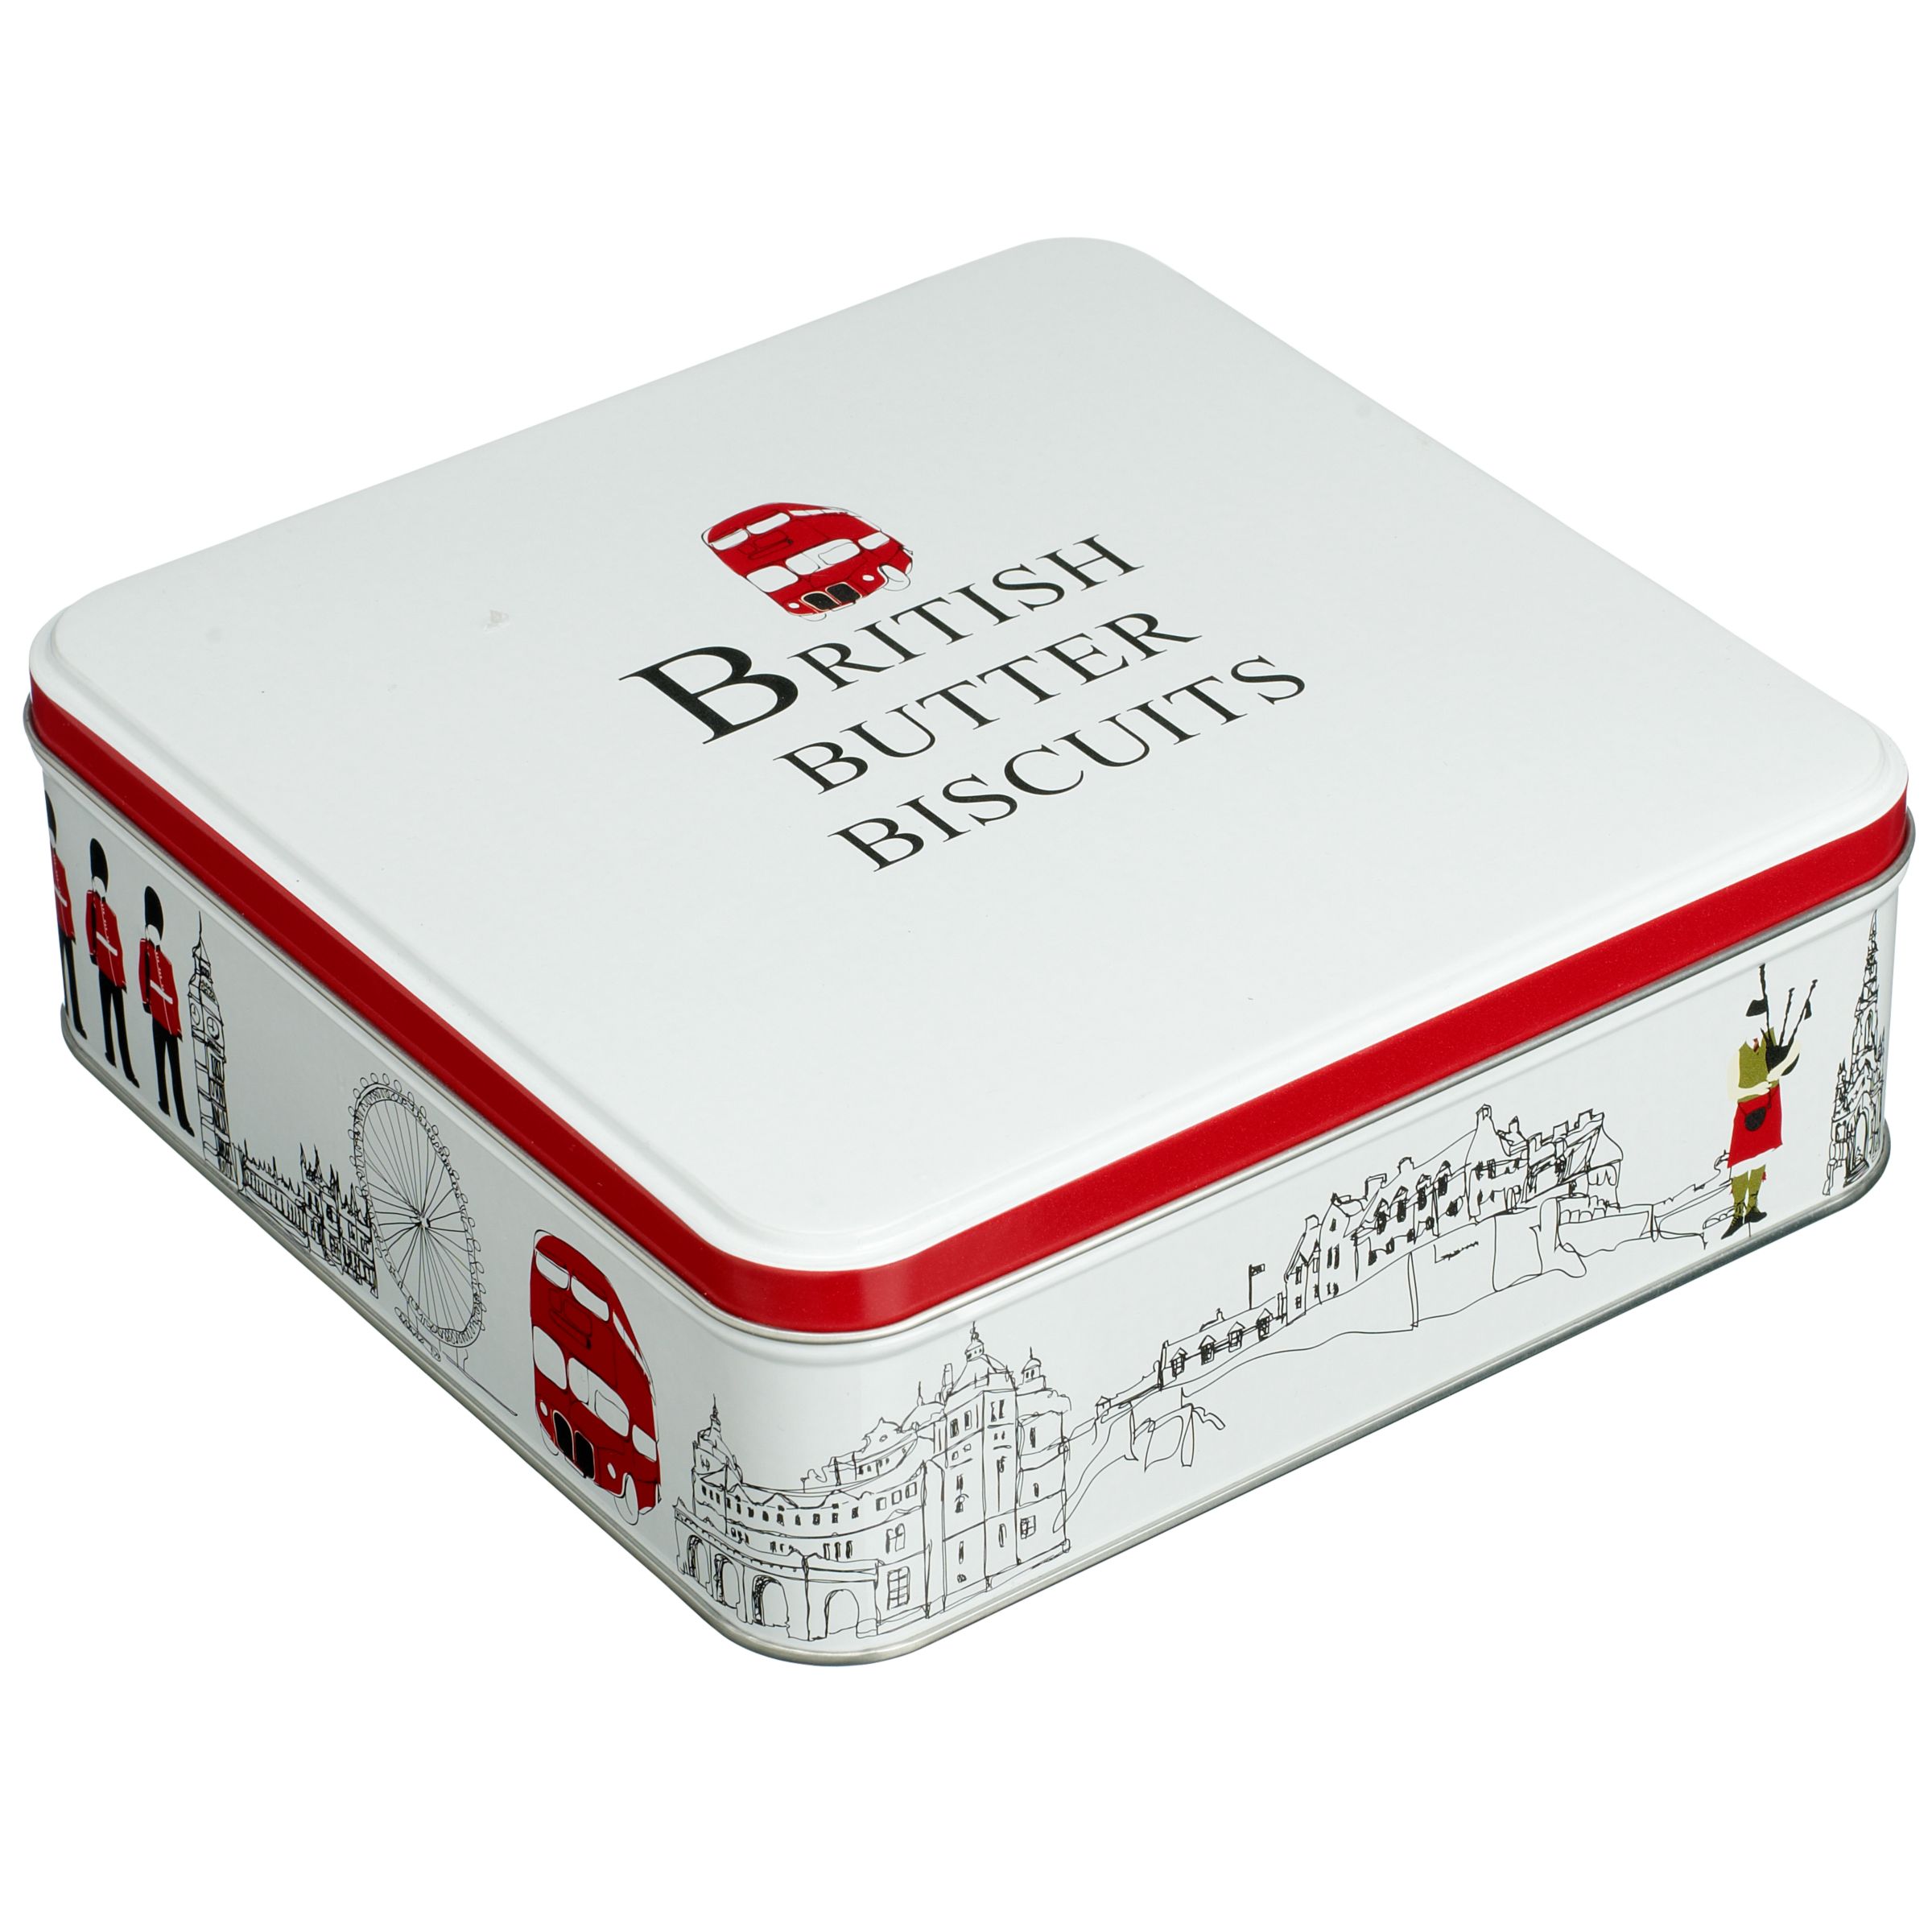 London British Butter Biscuits in a